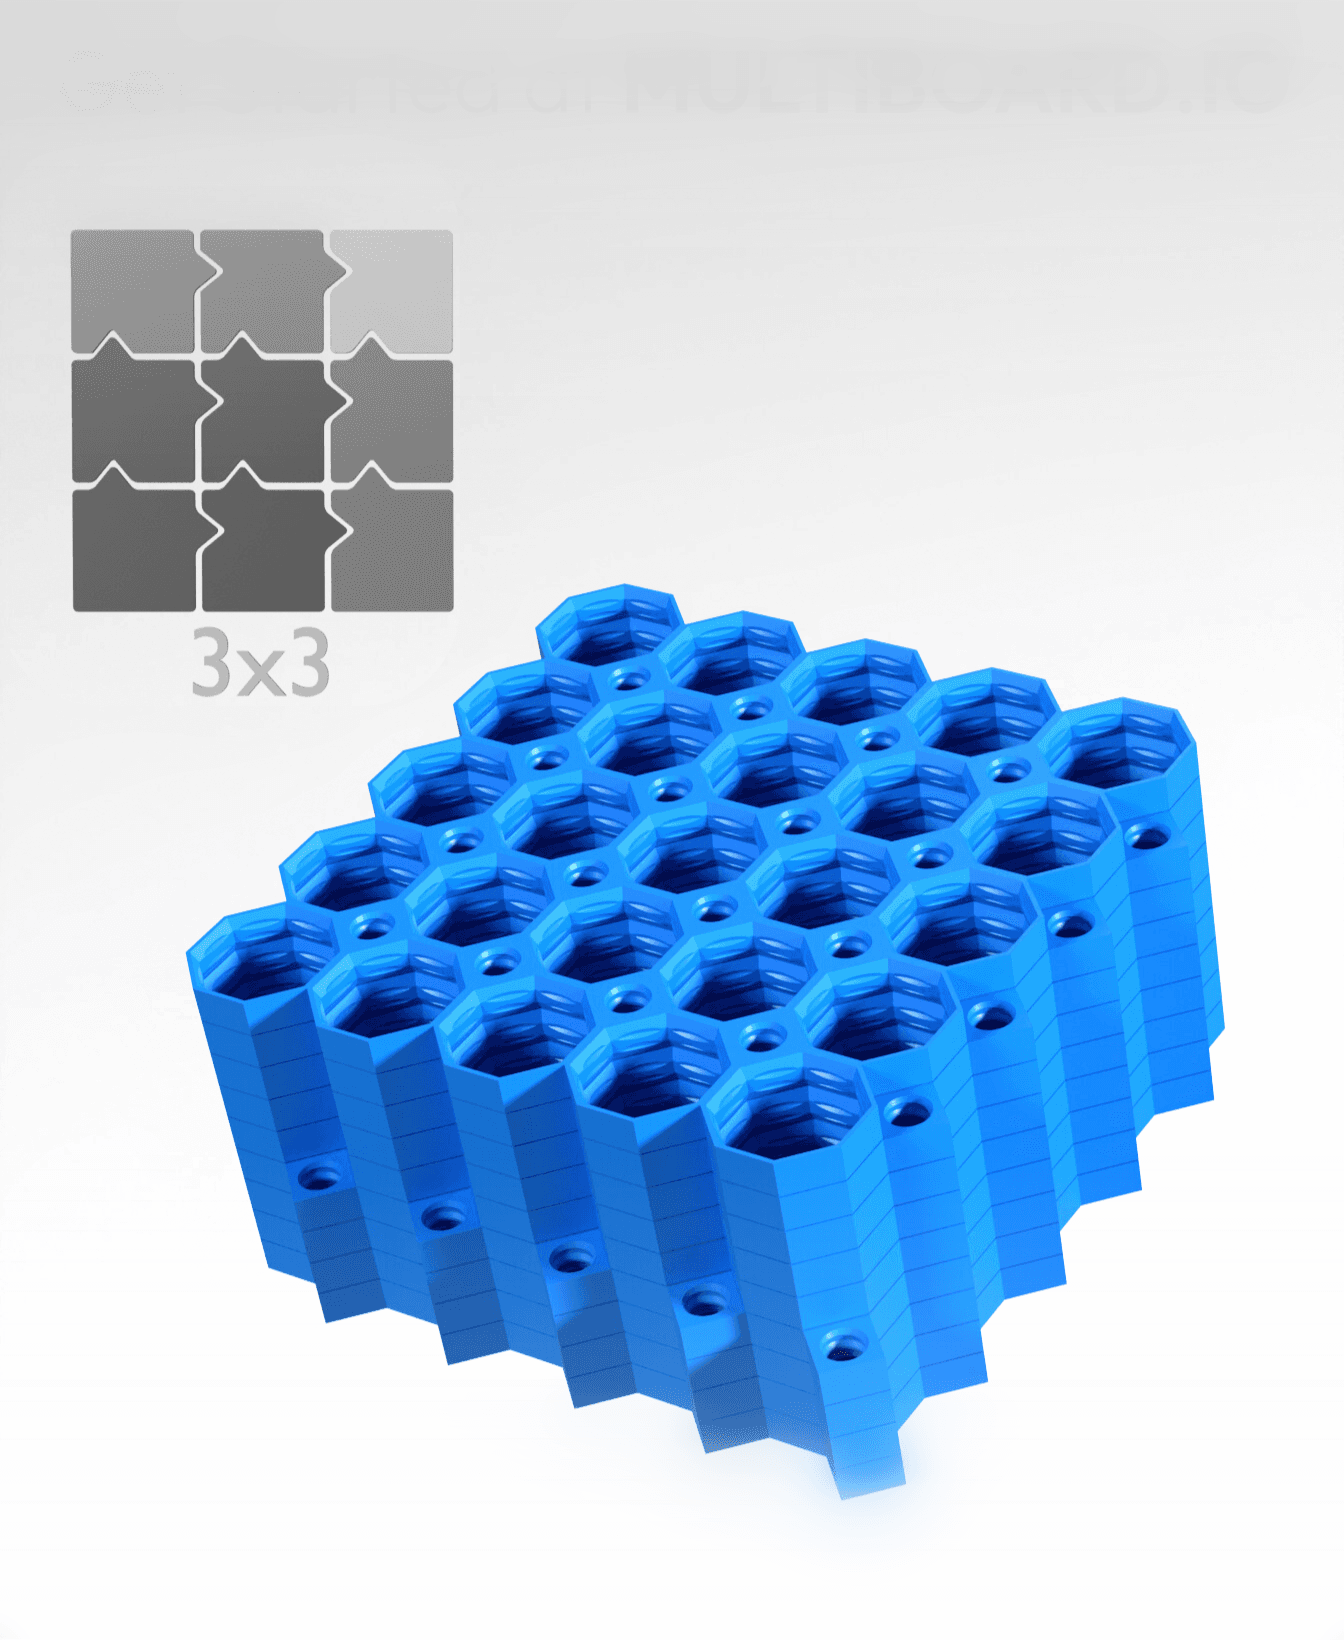 5x5 Tiles - 3x3 Board - Ironing Stack 3d model